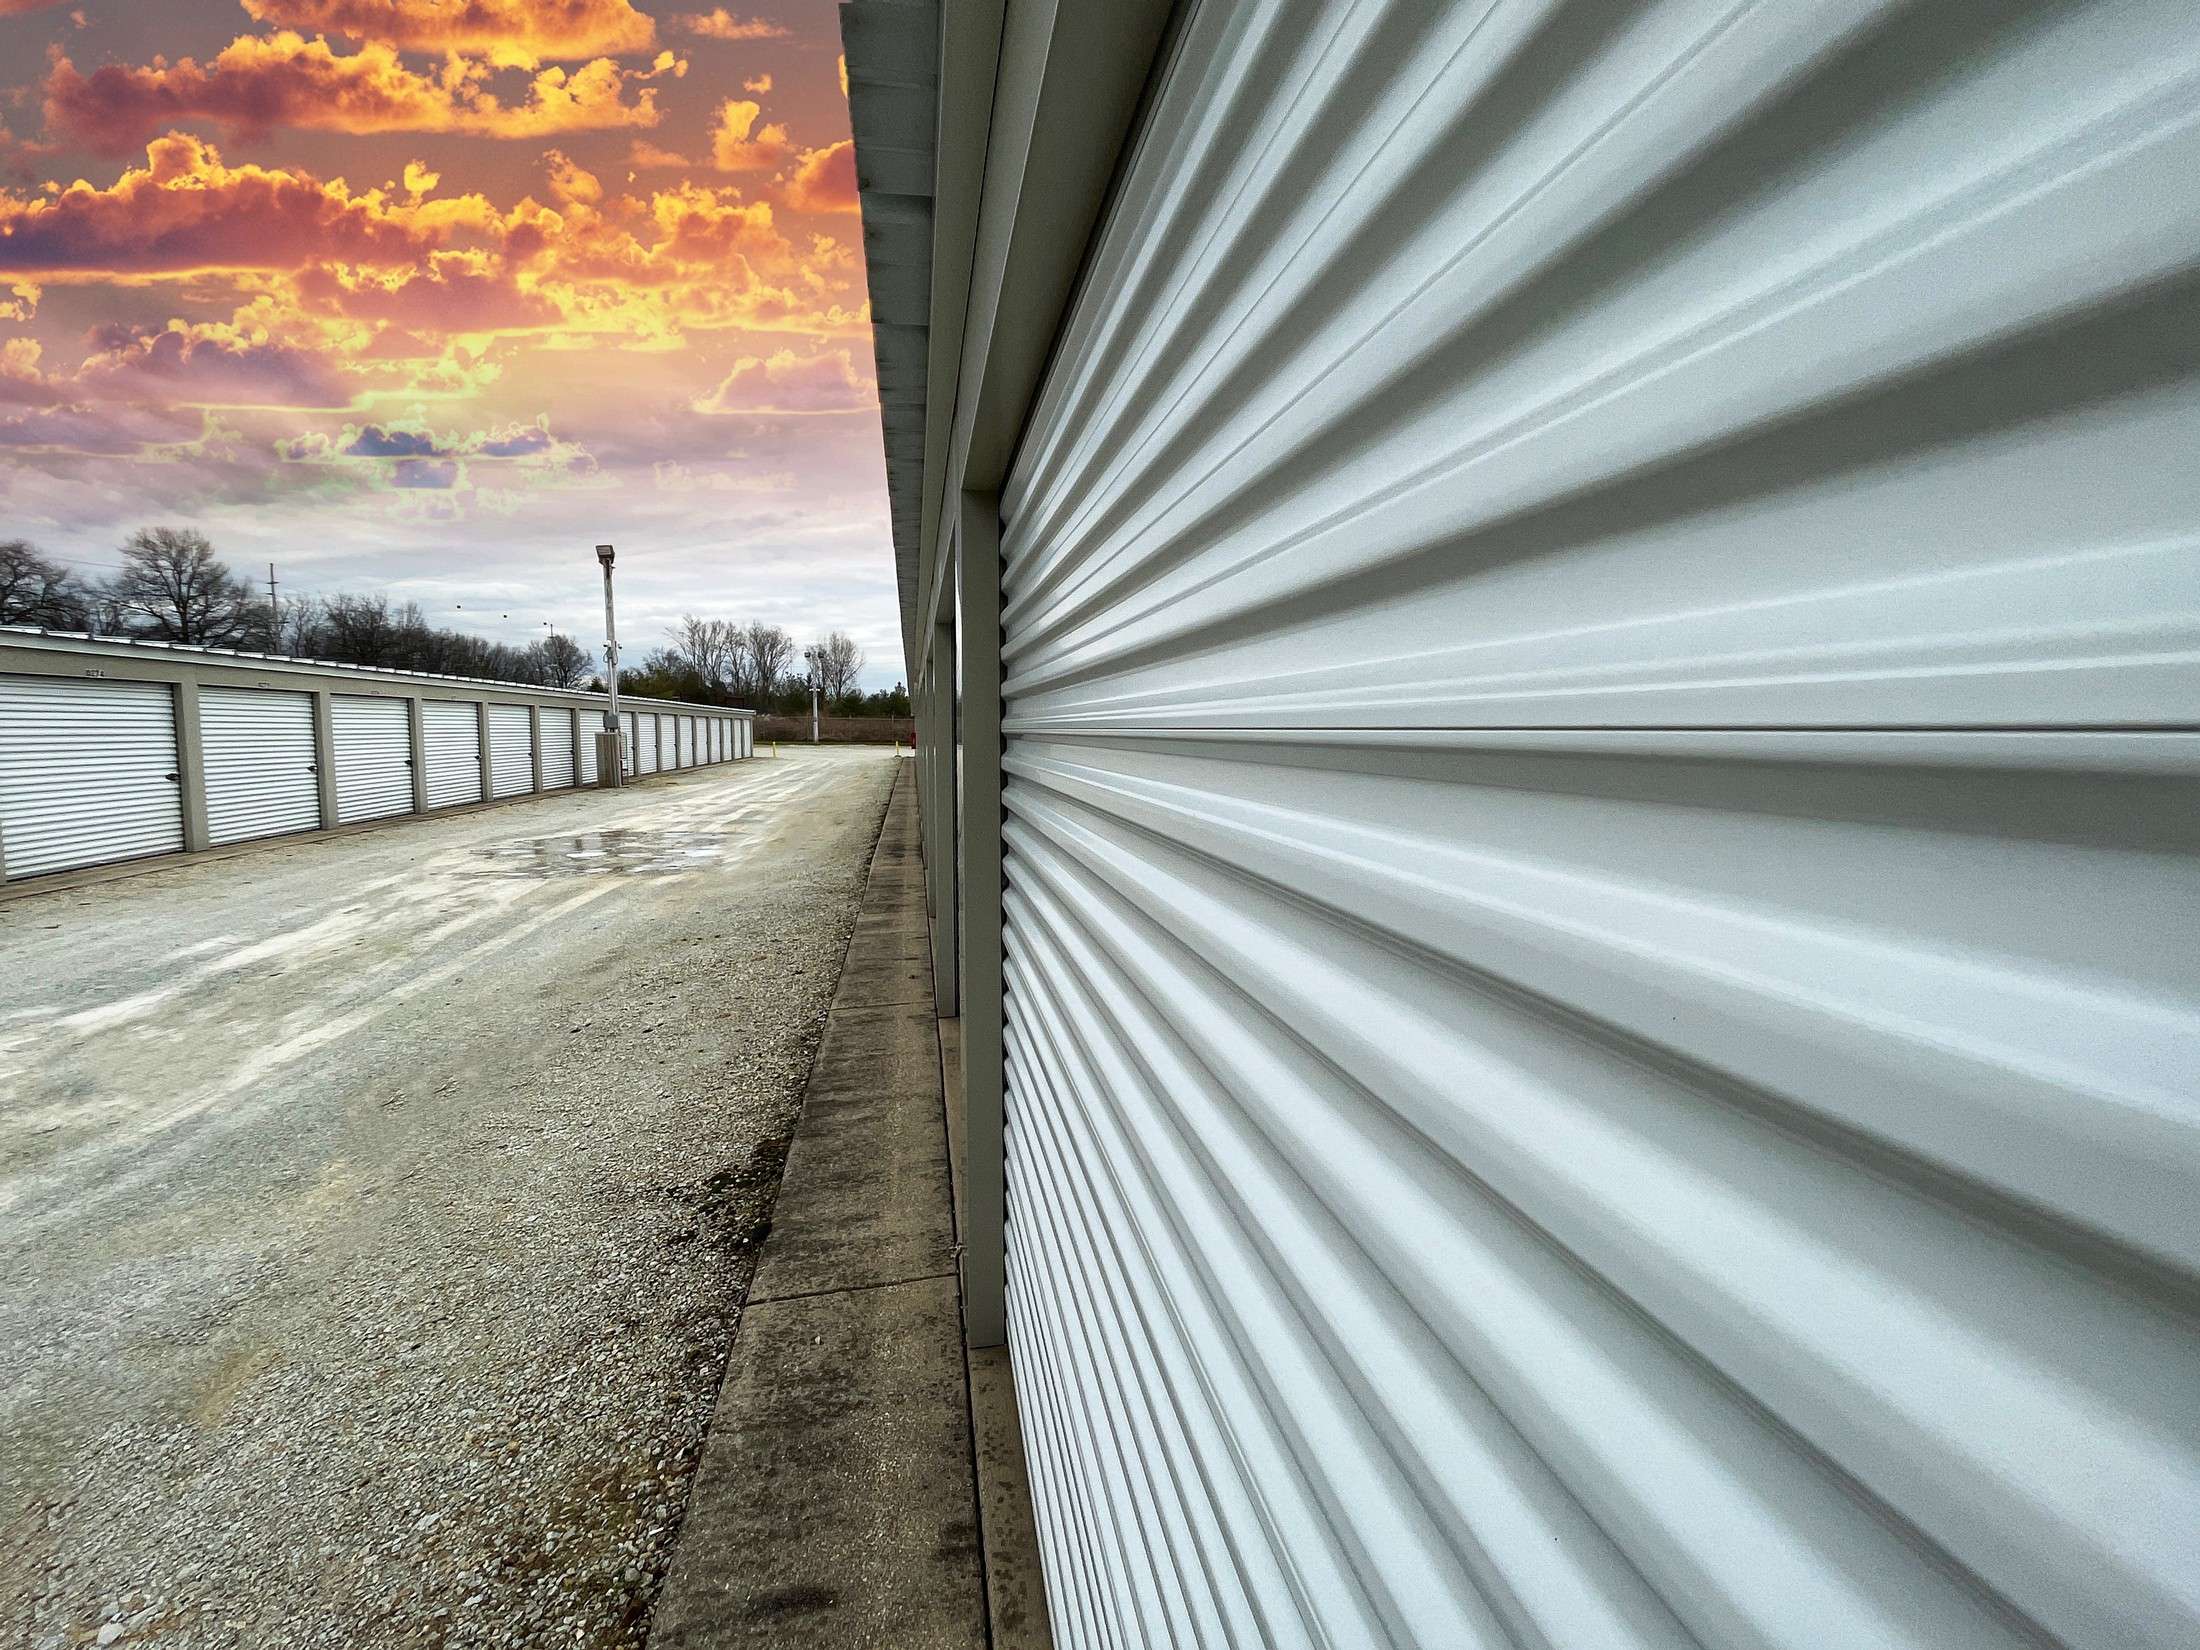 Self storage unit perspective image at sunset